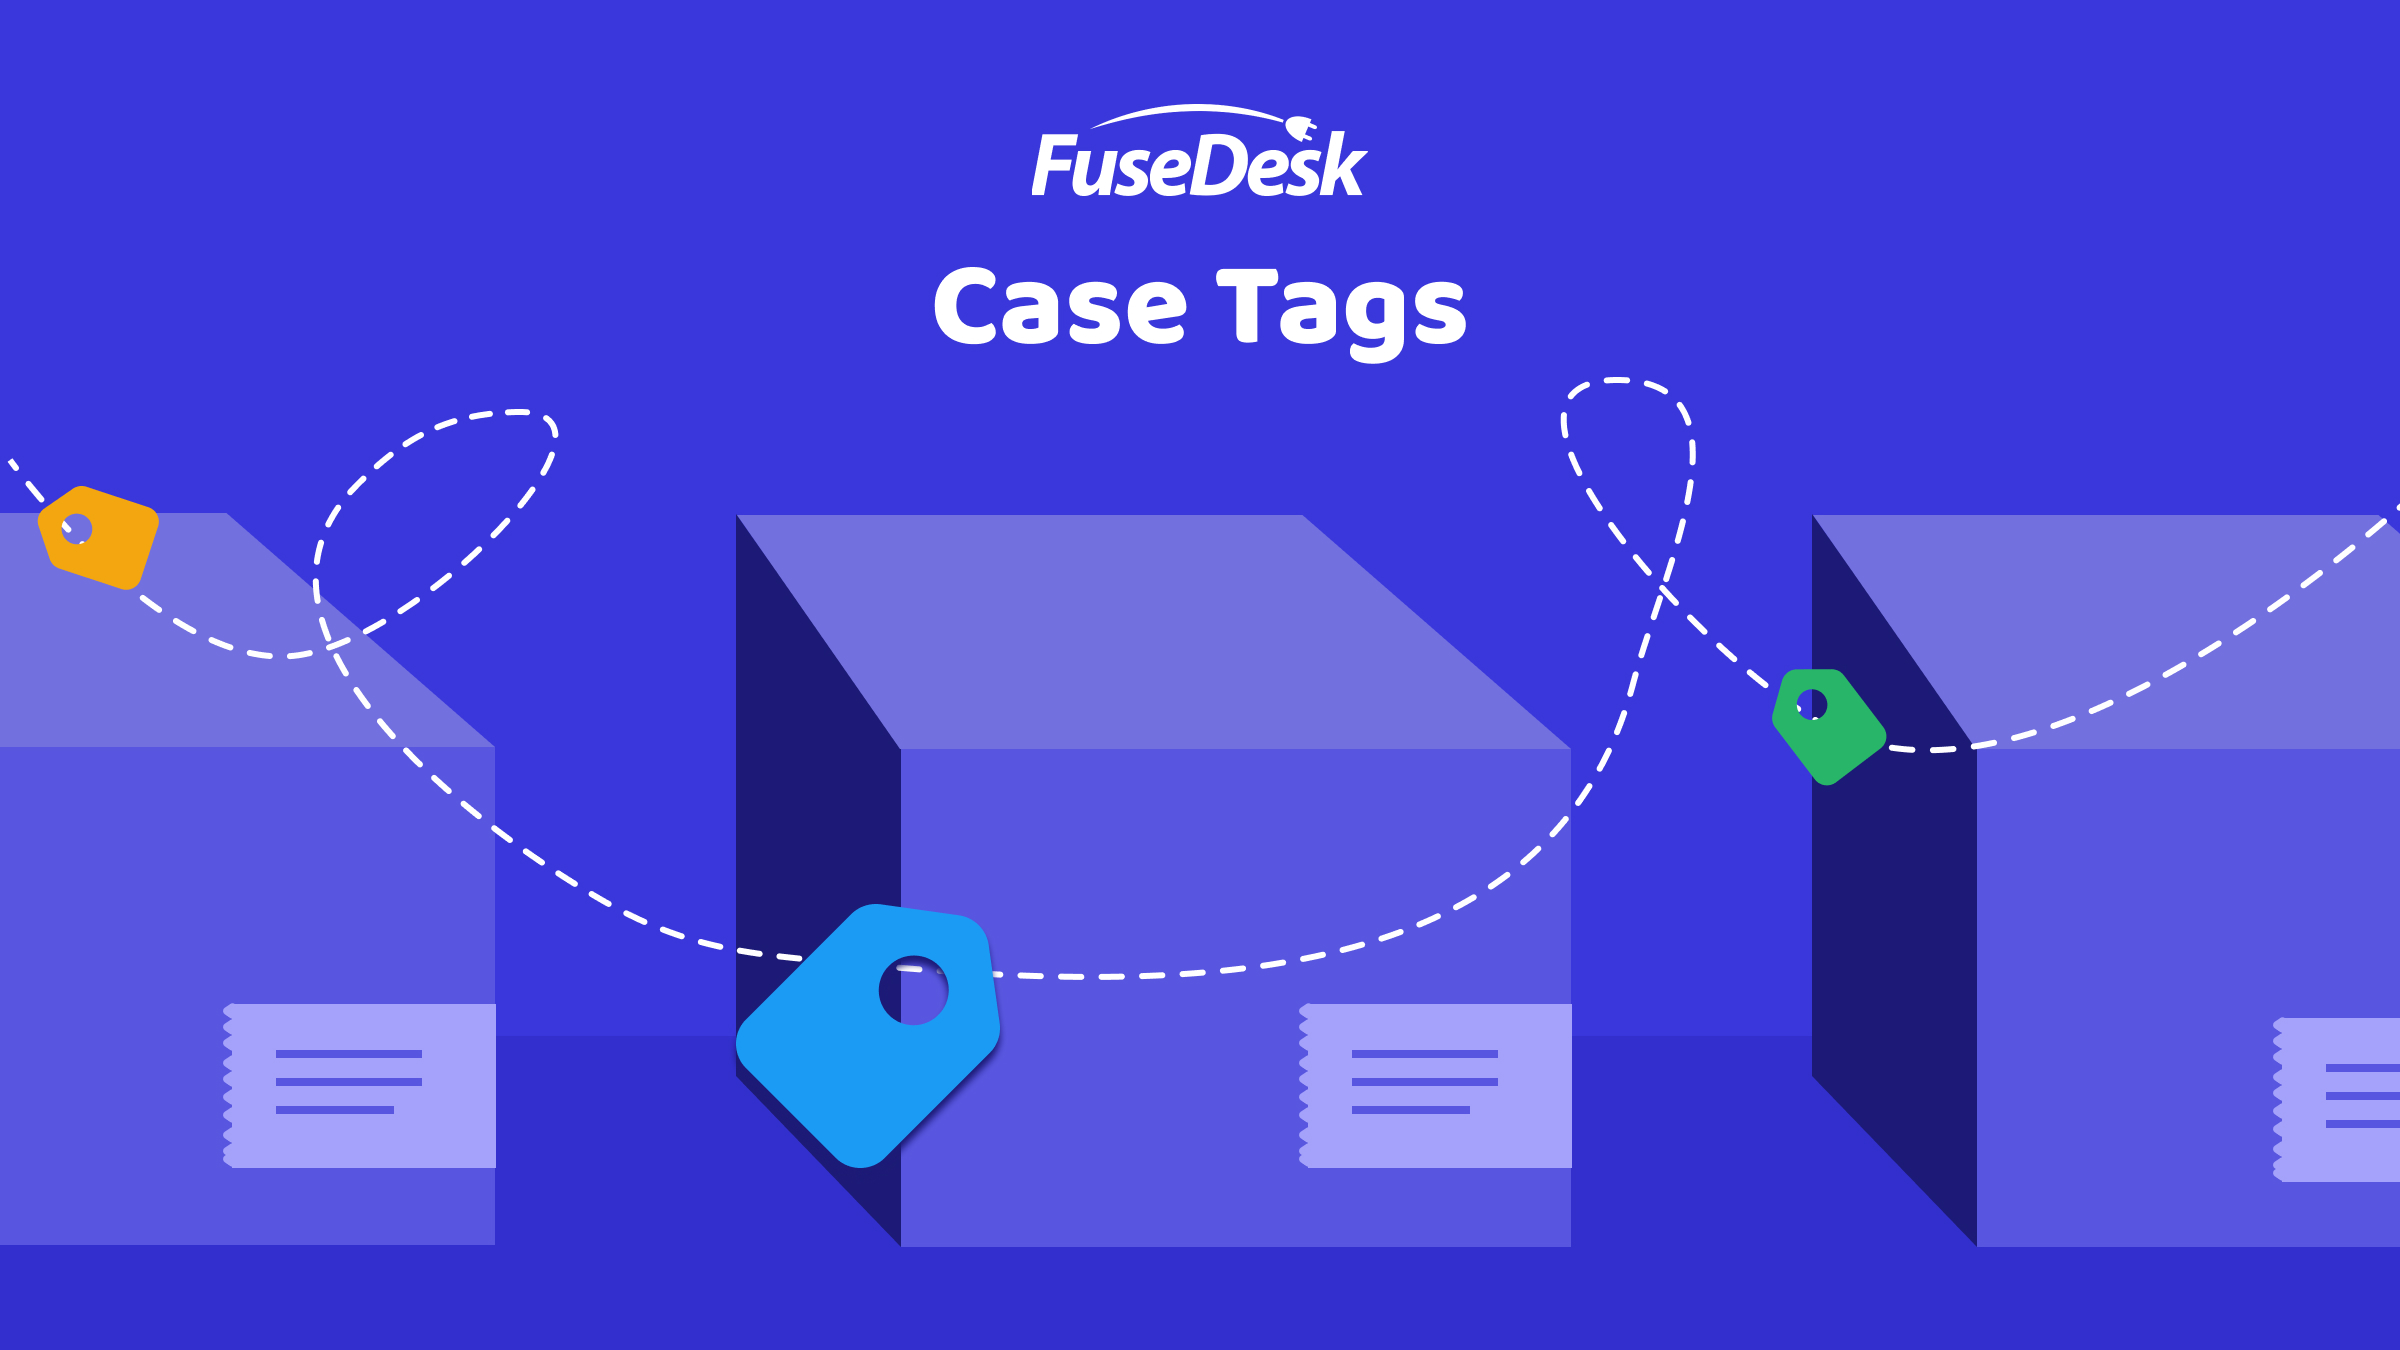 What are Case Tags?